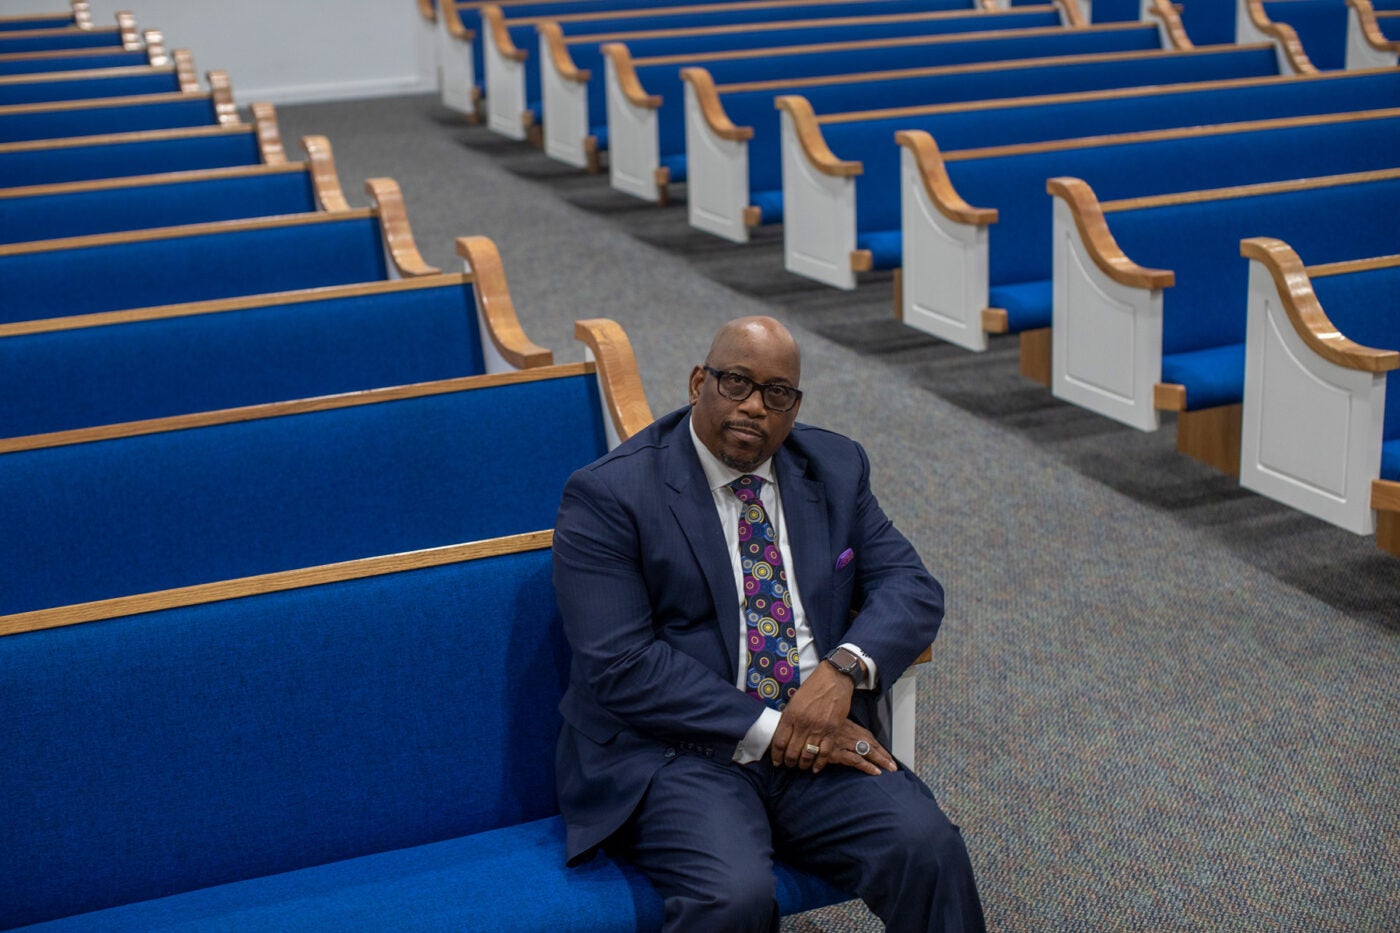 Pastor Allen Overton sits in a wooden pew with bright blue upholstery in his church. The pews cascade behind him in two rows.